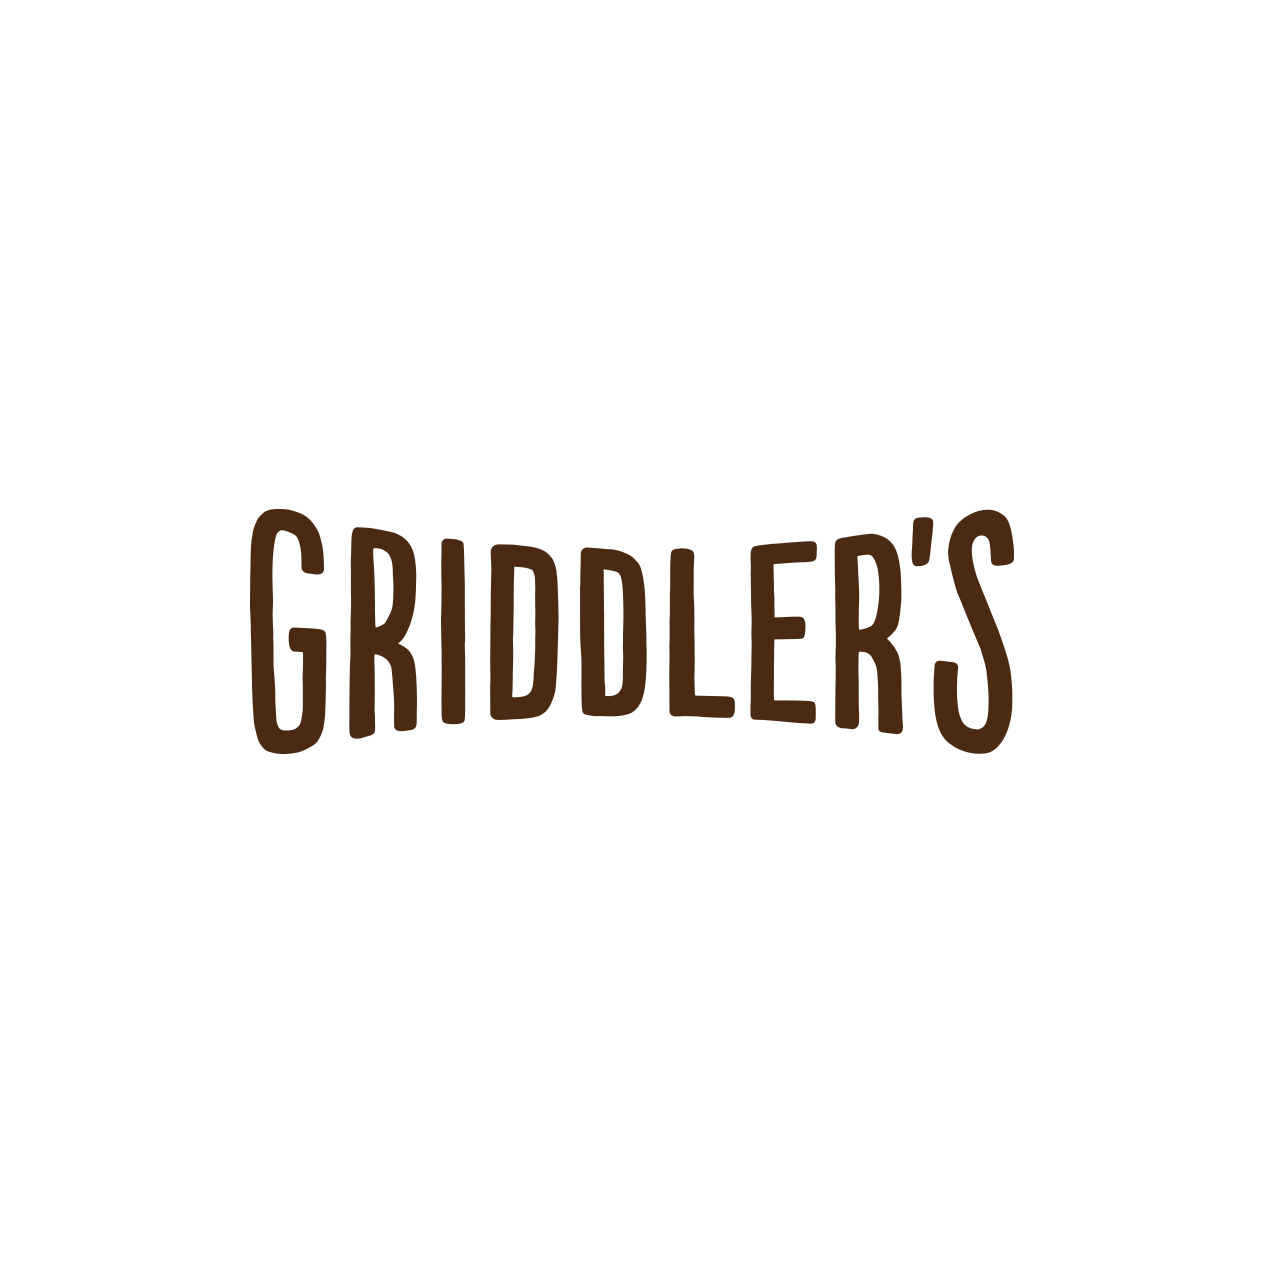 nelsoncouto-work-logos-griddlers-v2